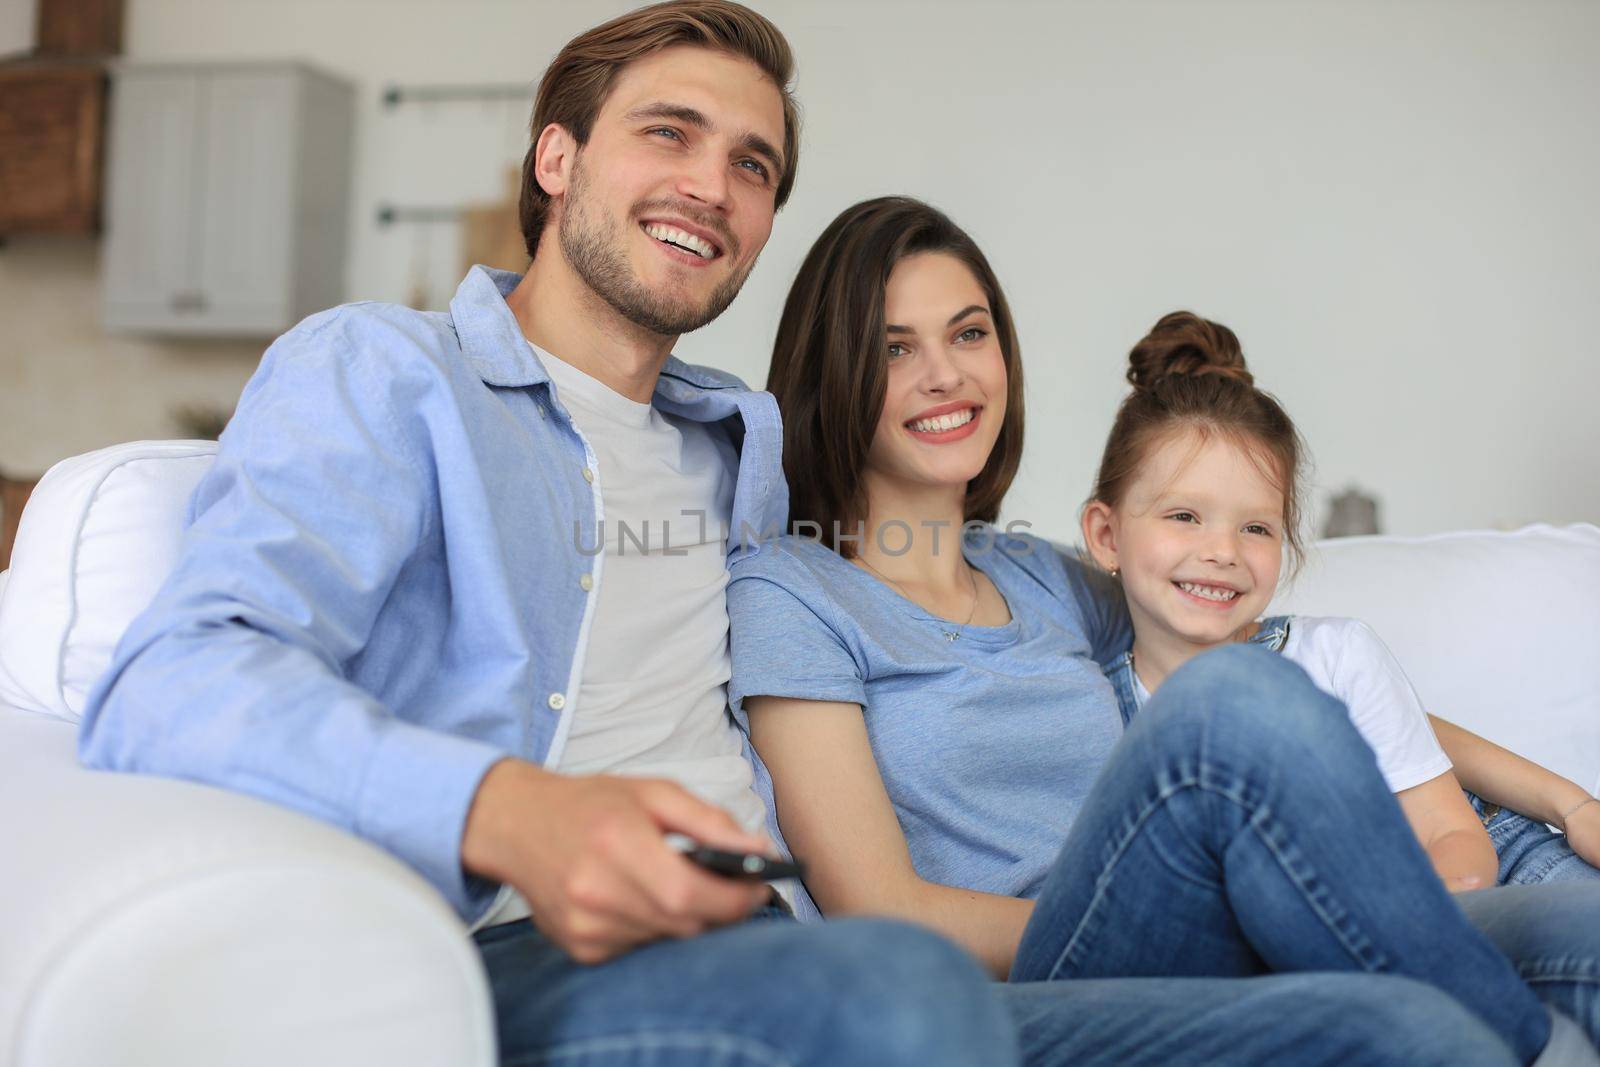 Happy family with child sitting on sofa watching tv, young parents embracing daughter relaxing on couch together. by tsyhun